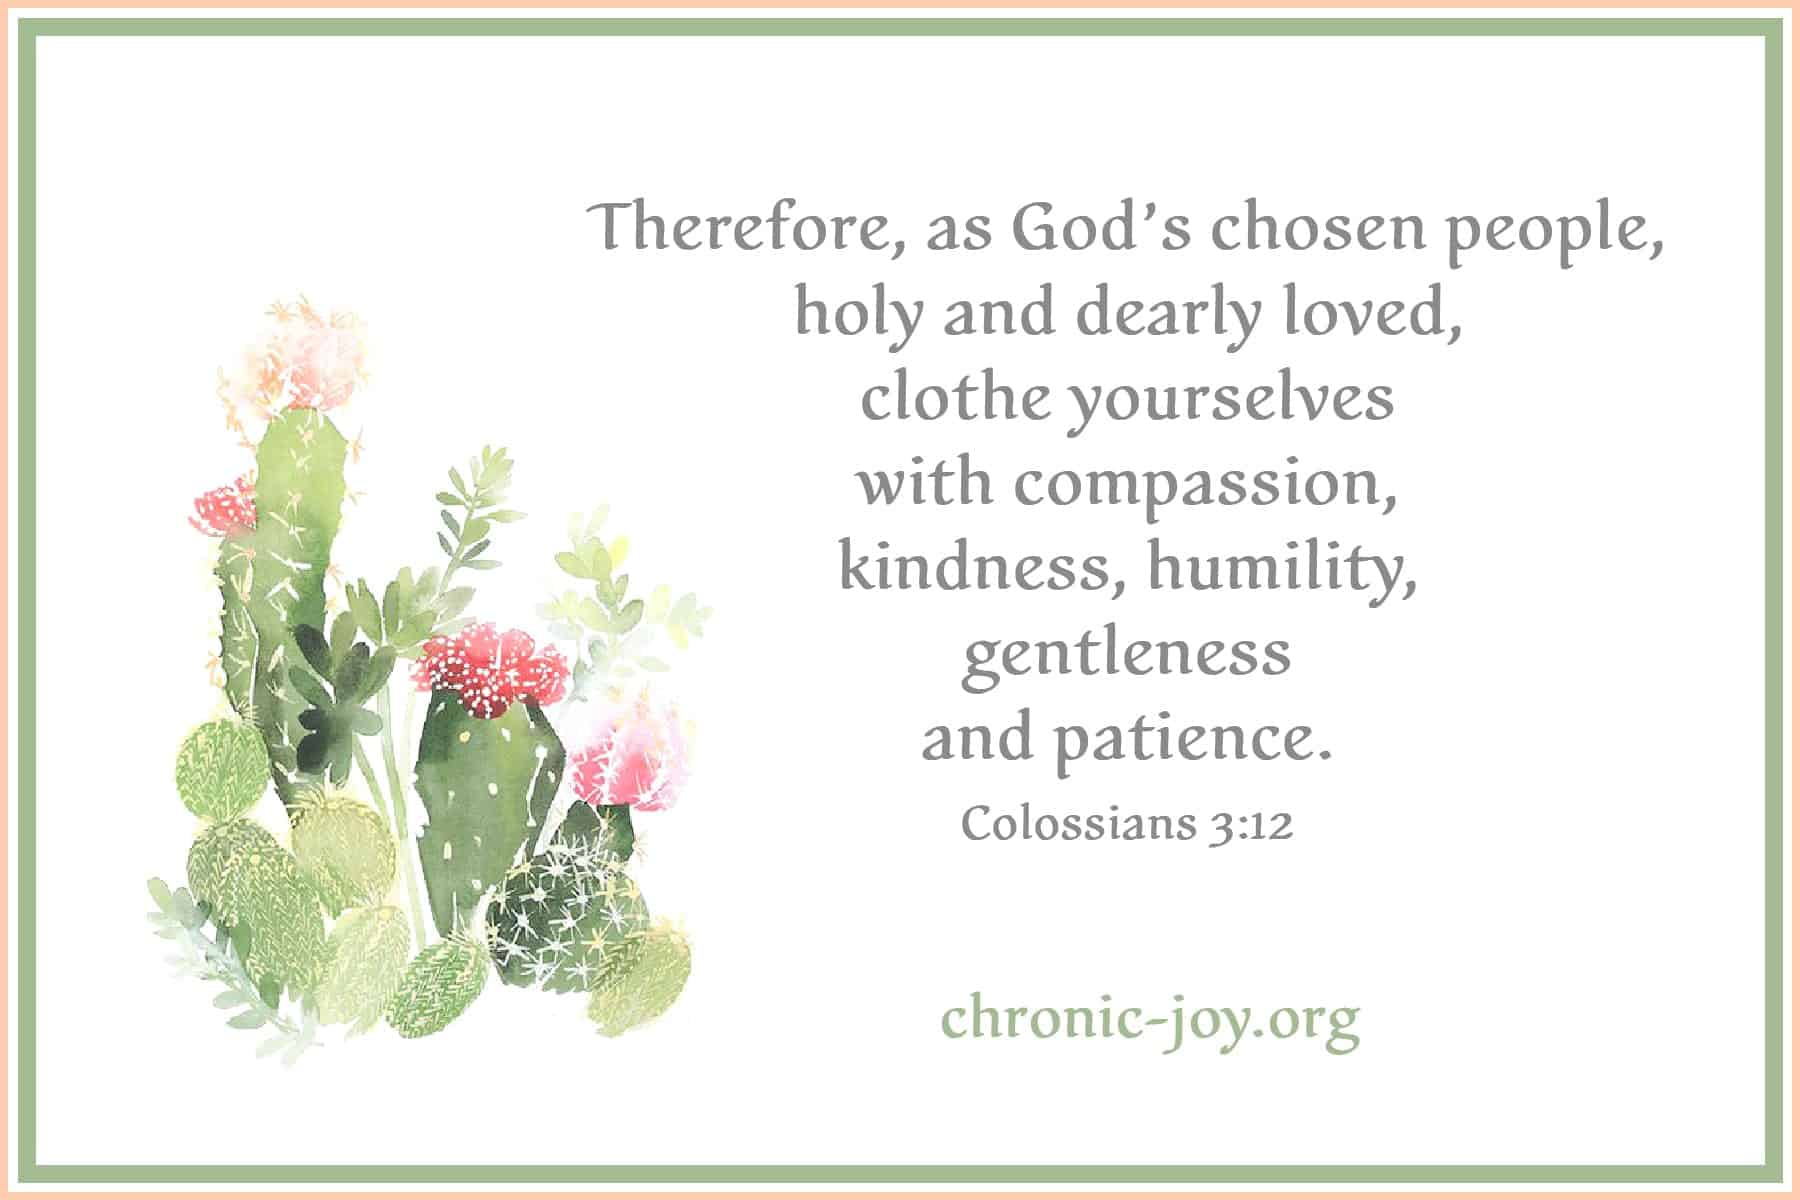 Therefore, as God’s chosen people, holy and dearly loved, clothe yourselves with compassion, kindness, humility, gentleness and patience.  (Colossians 3:12)